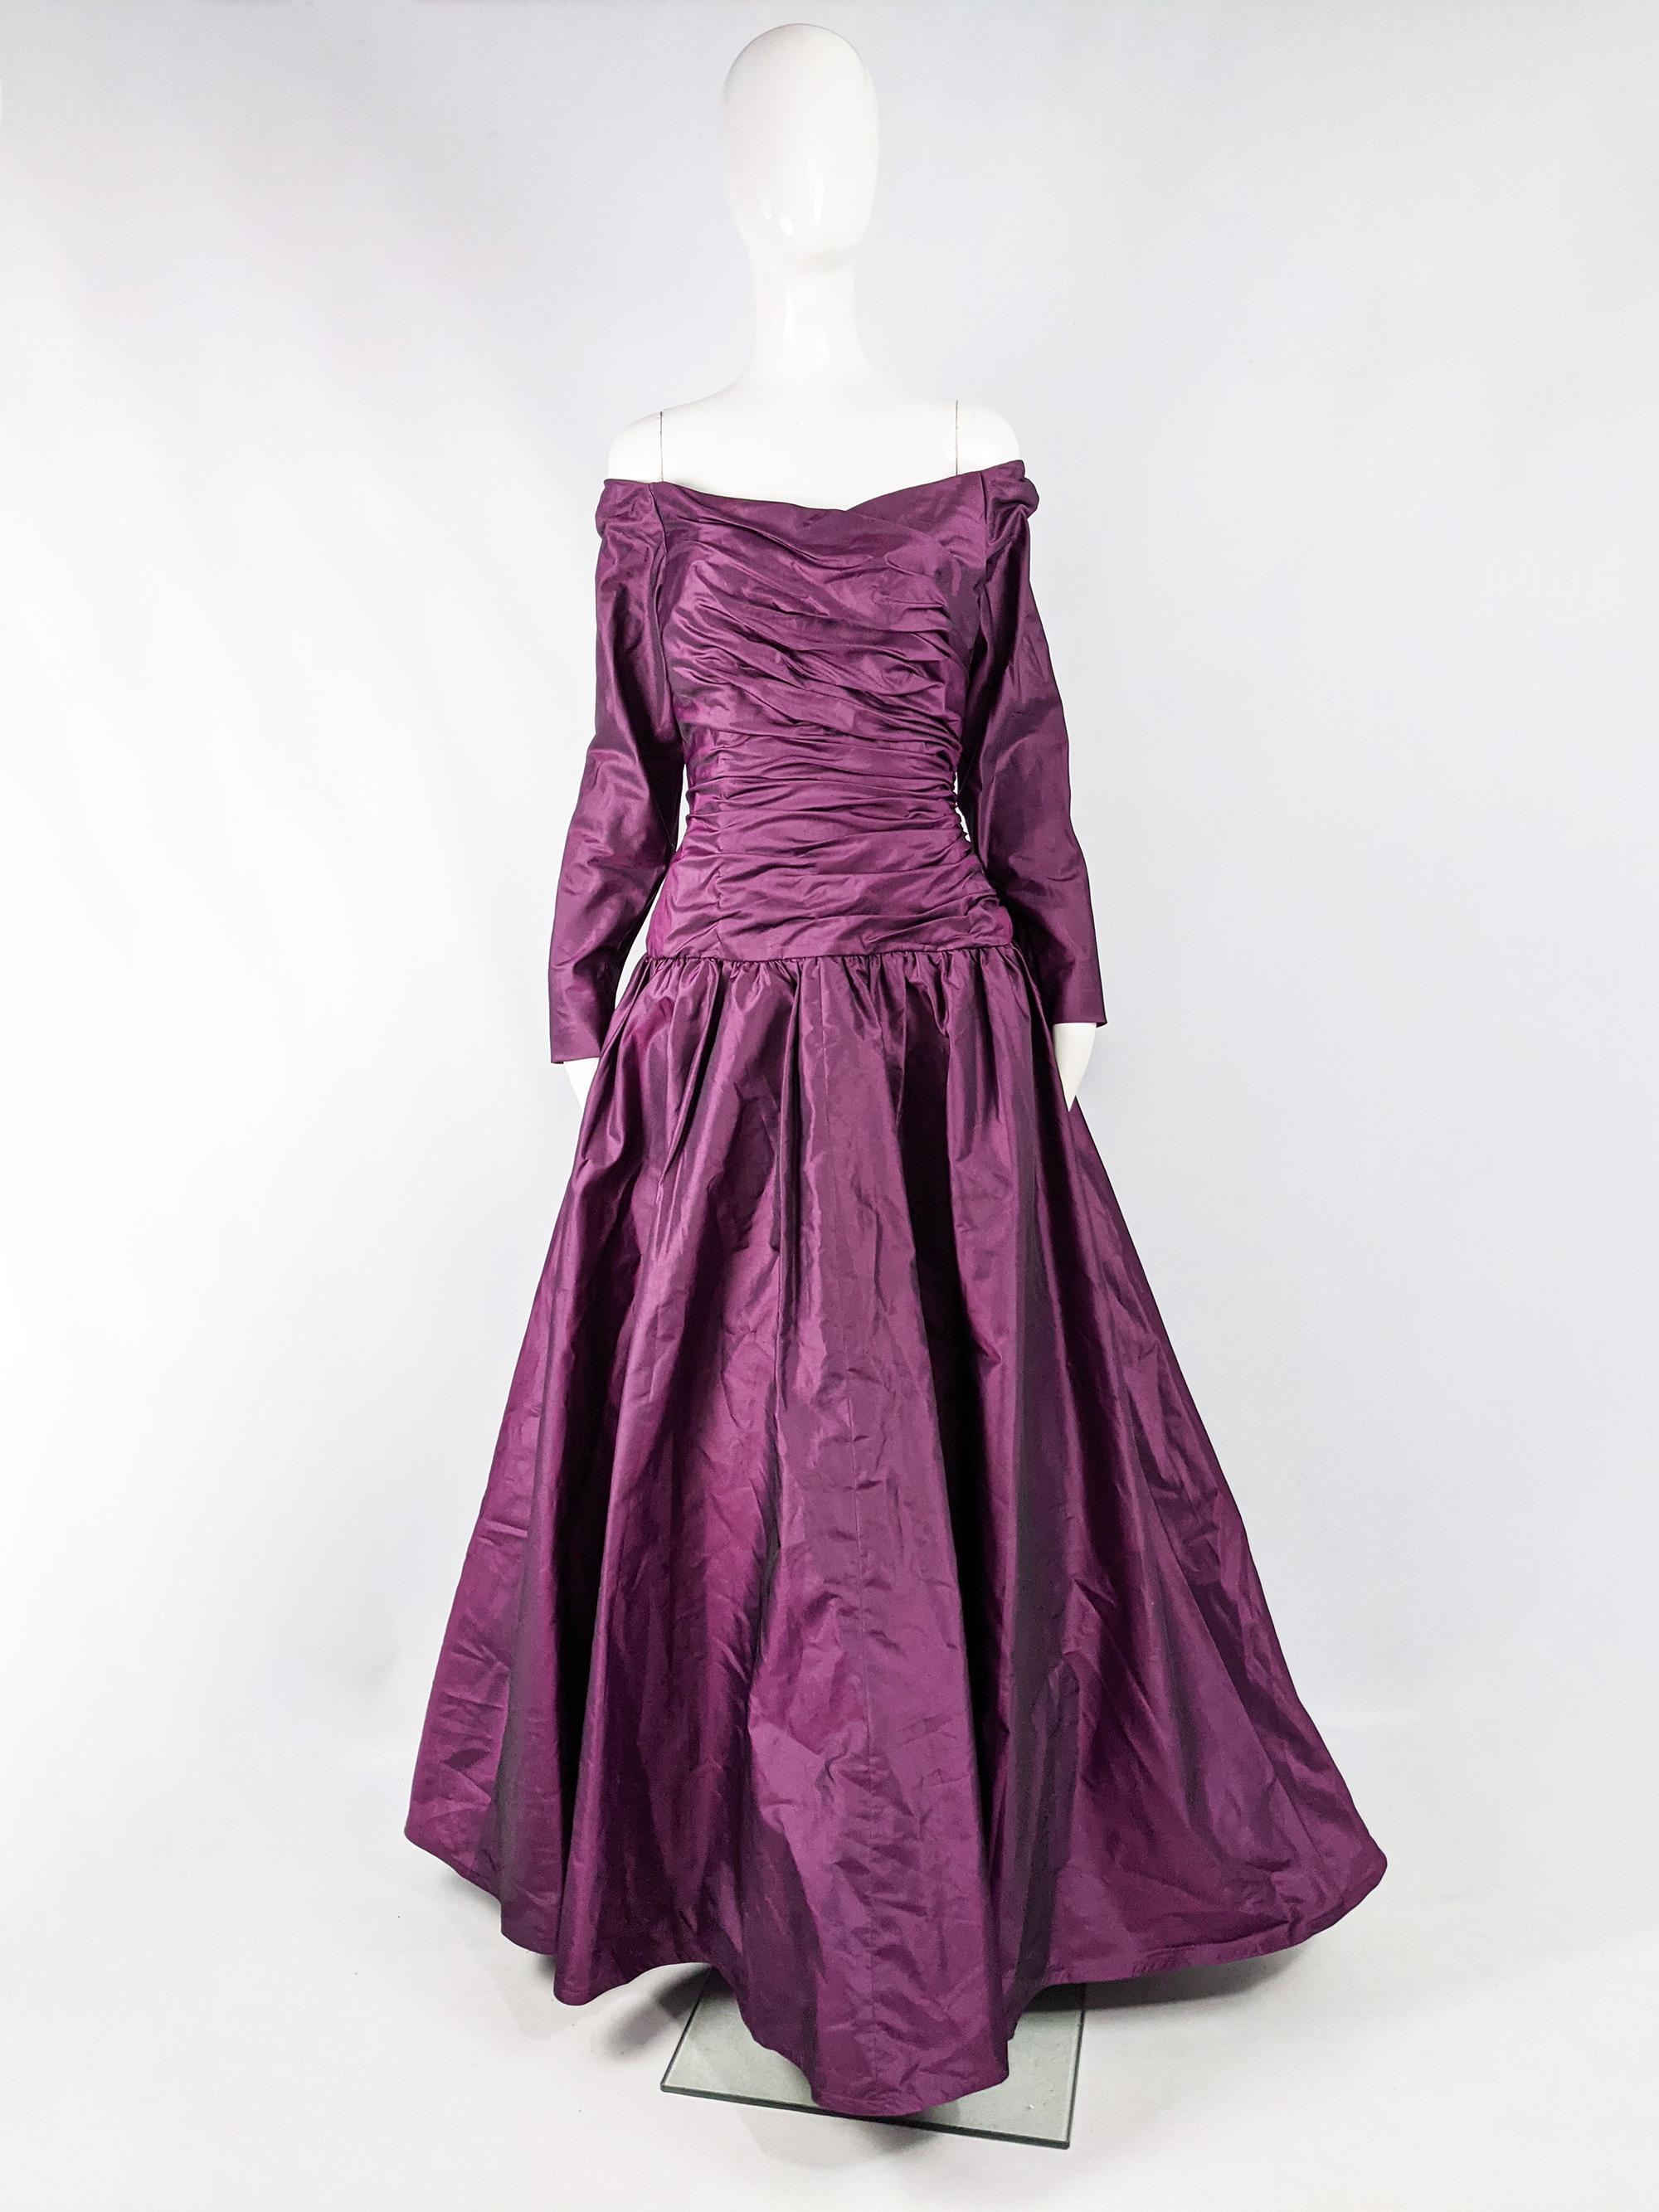 An incredible vintage evening dress from the 80s by luxury British fashion designer, Murray Arbeid, who was known for his extensive use of taffeta in timeless, glamorous silhouettes worn by the likes of Shirley Basse, Esteé Lauder and Princess